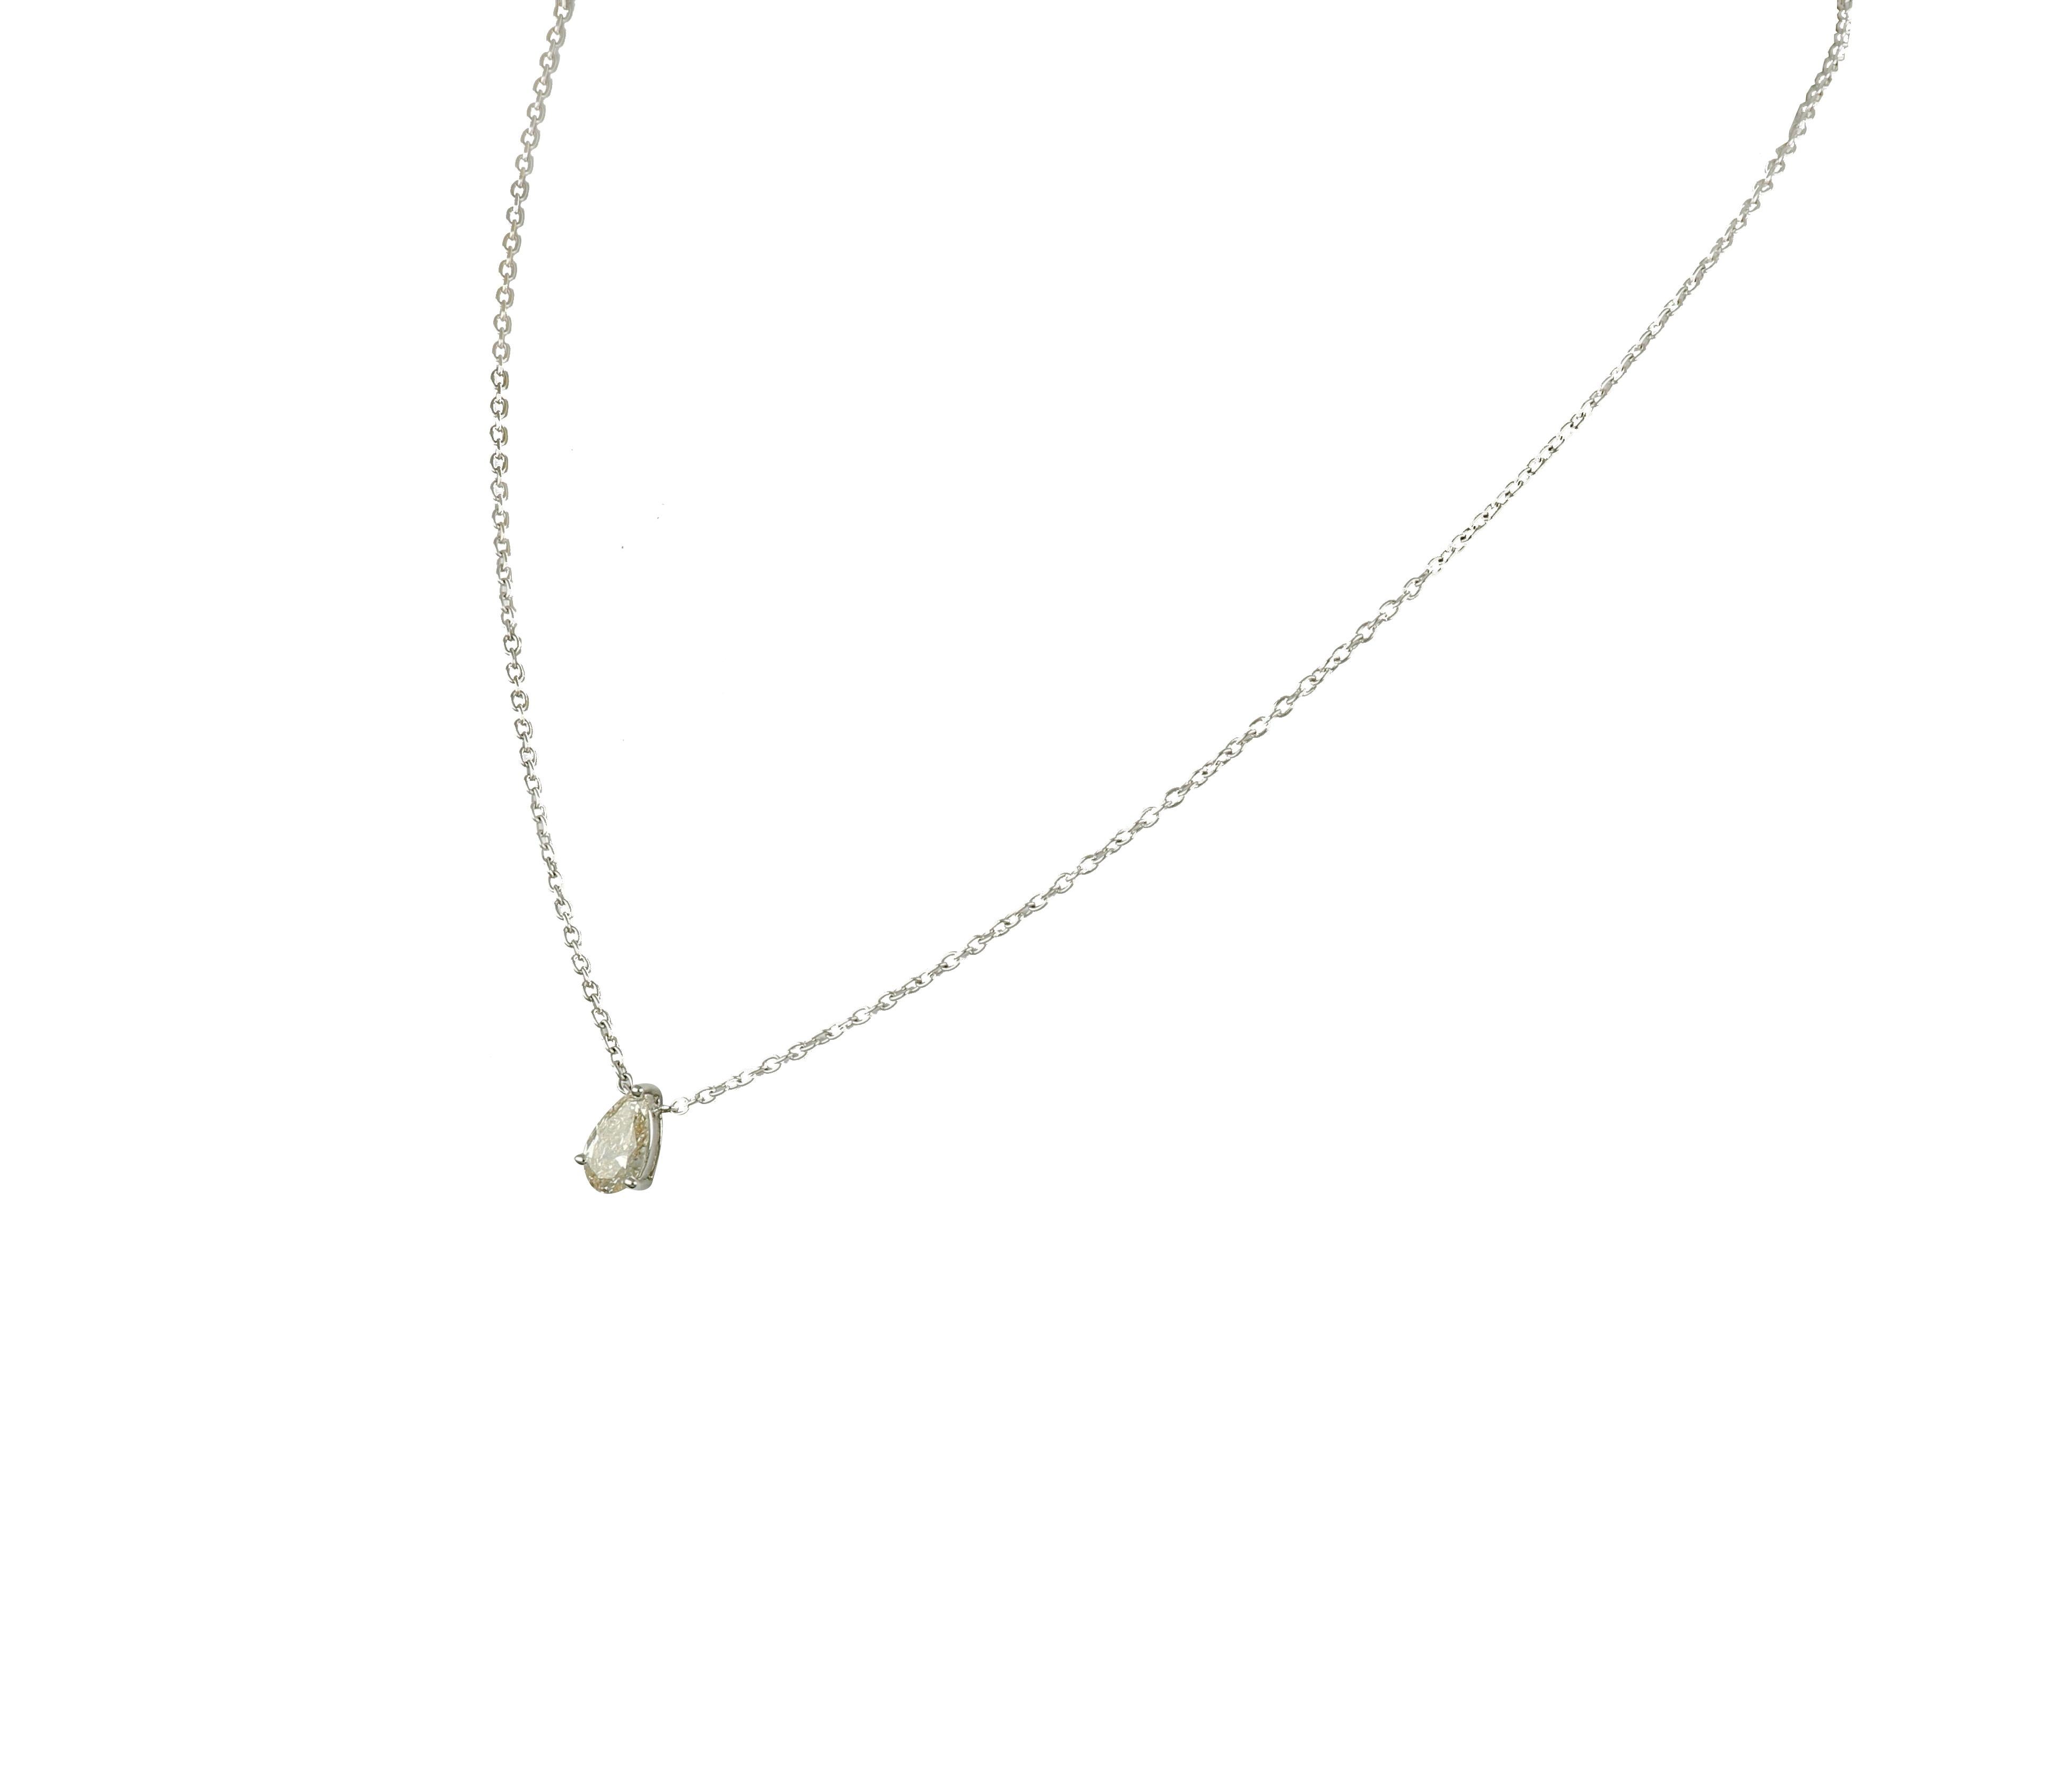 Amwaj 18 karat gold pendant with pear shape diamond is endlessly appealing, with its streamlined shape complemented by a subtle white gold chain that lets the stone to take centre stage and set to ensure that its natural sparkle can powerfully